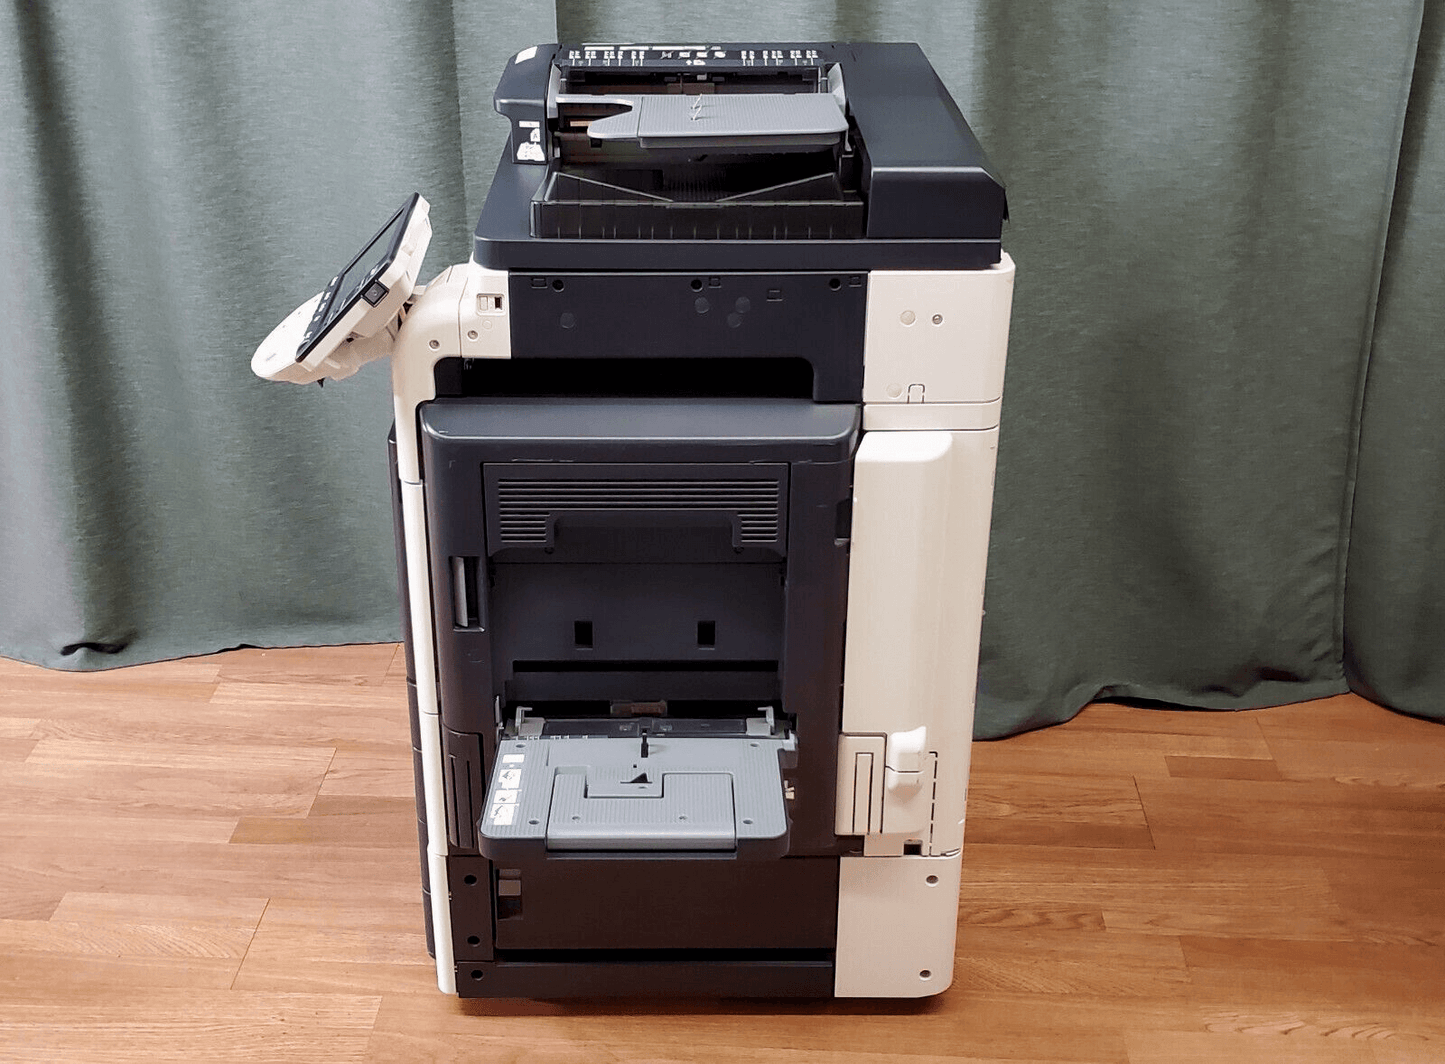 Muratec MFX-c2828 Color Copier Printer Scanner and Fax VERY LOW Meter Count 77k! - copier-clearance-center